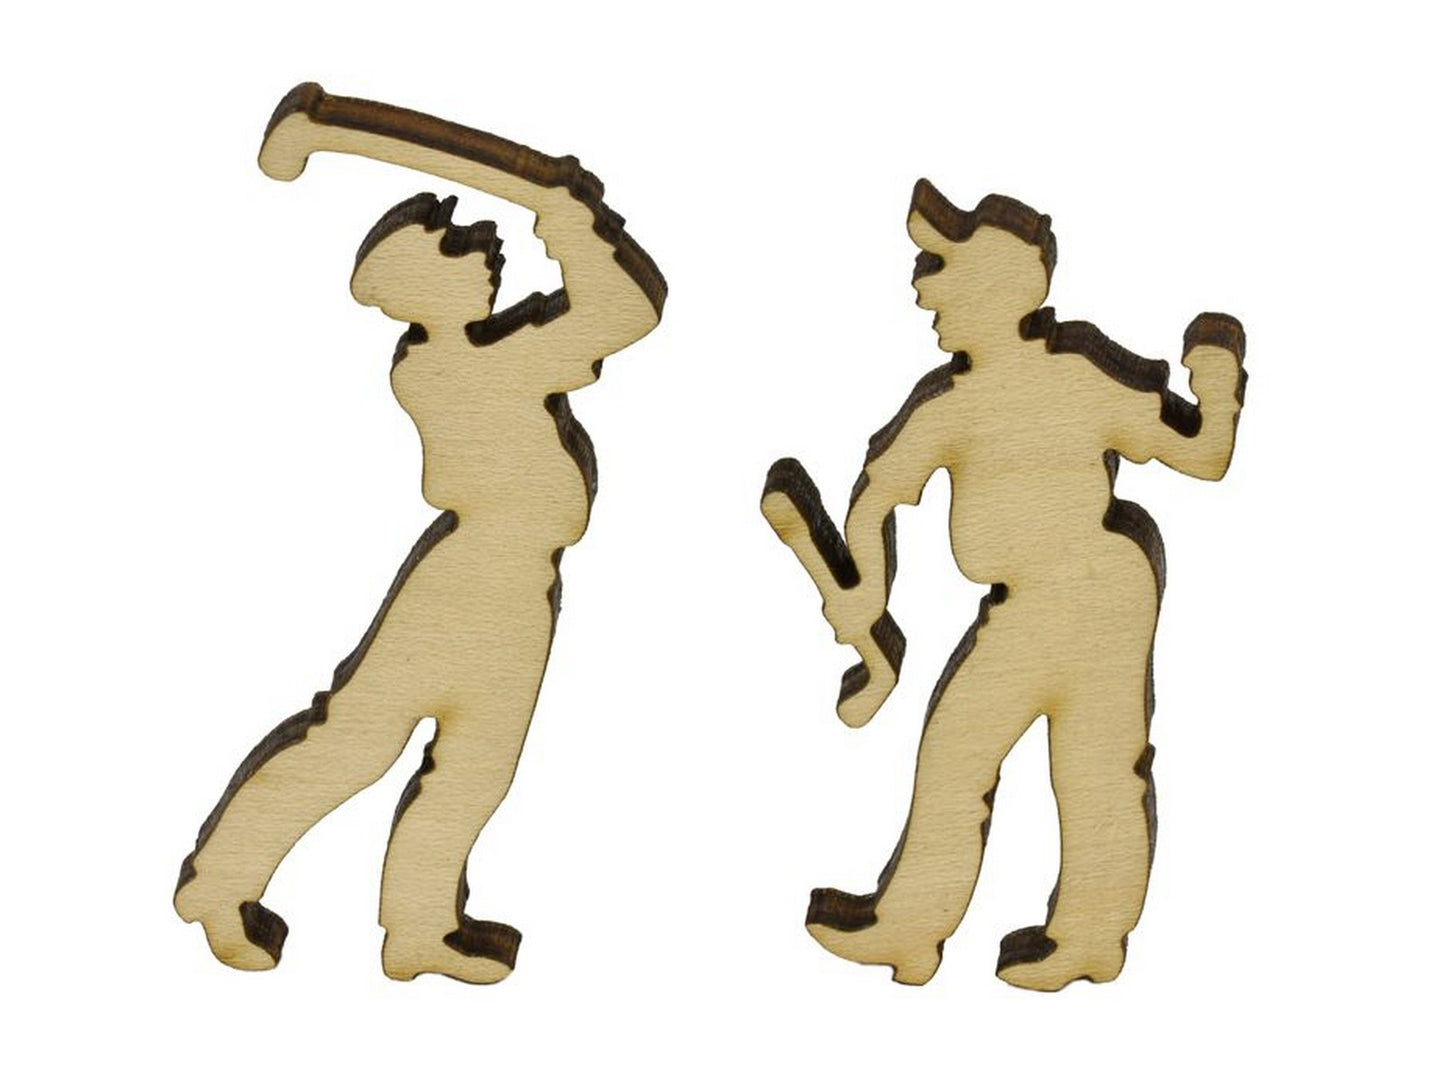 A closeup of pieces in the shape of two golfers.